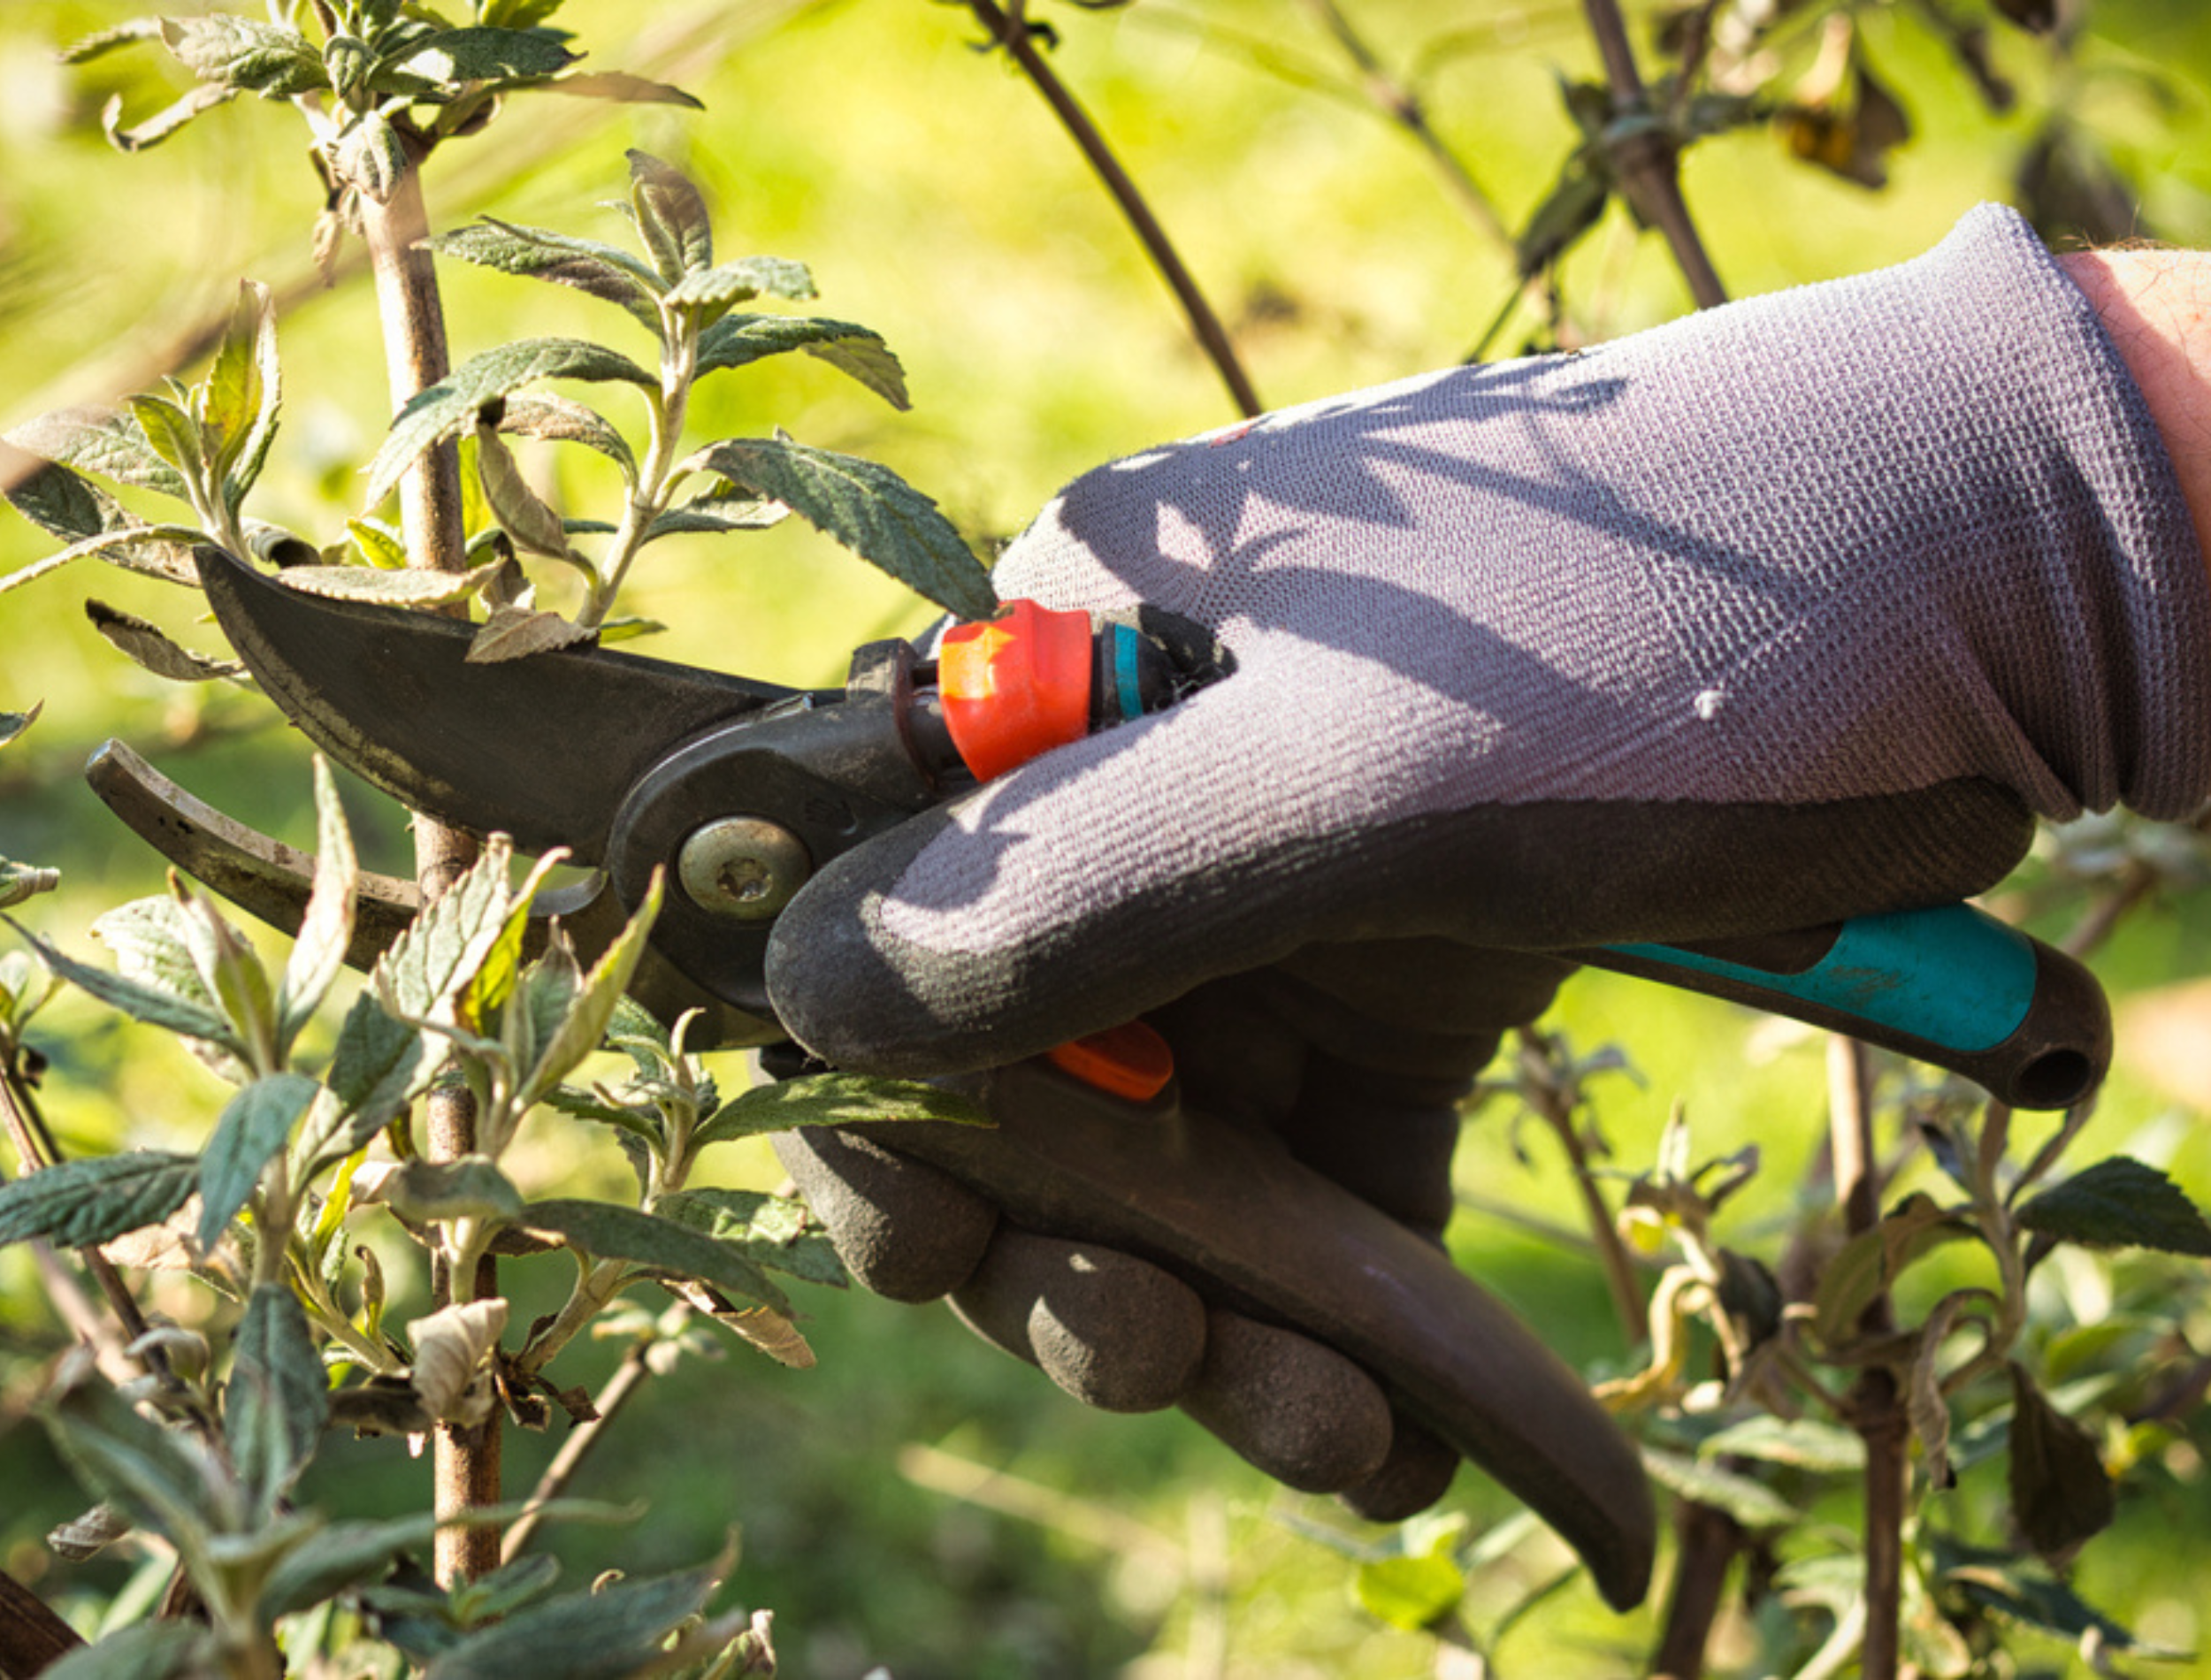 Close view of a gardener’s hand pruning branches of a butterfly bush with pruning shears in spring.